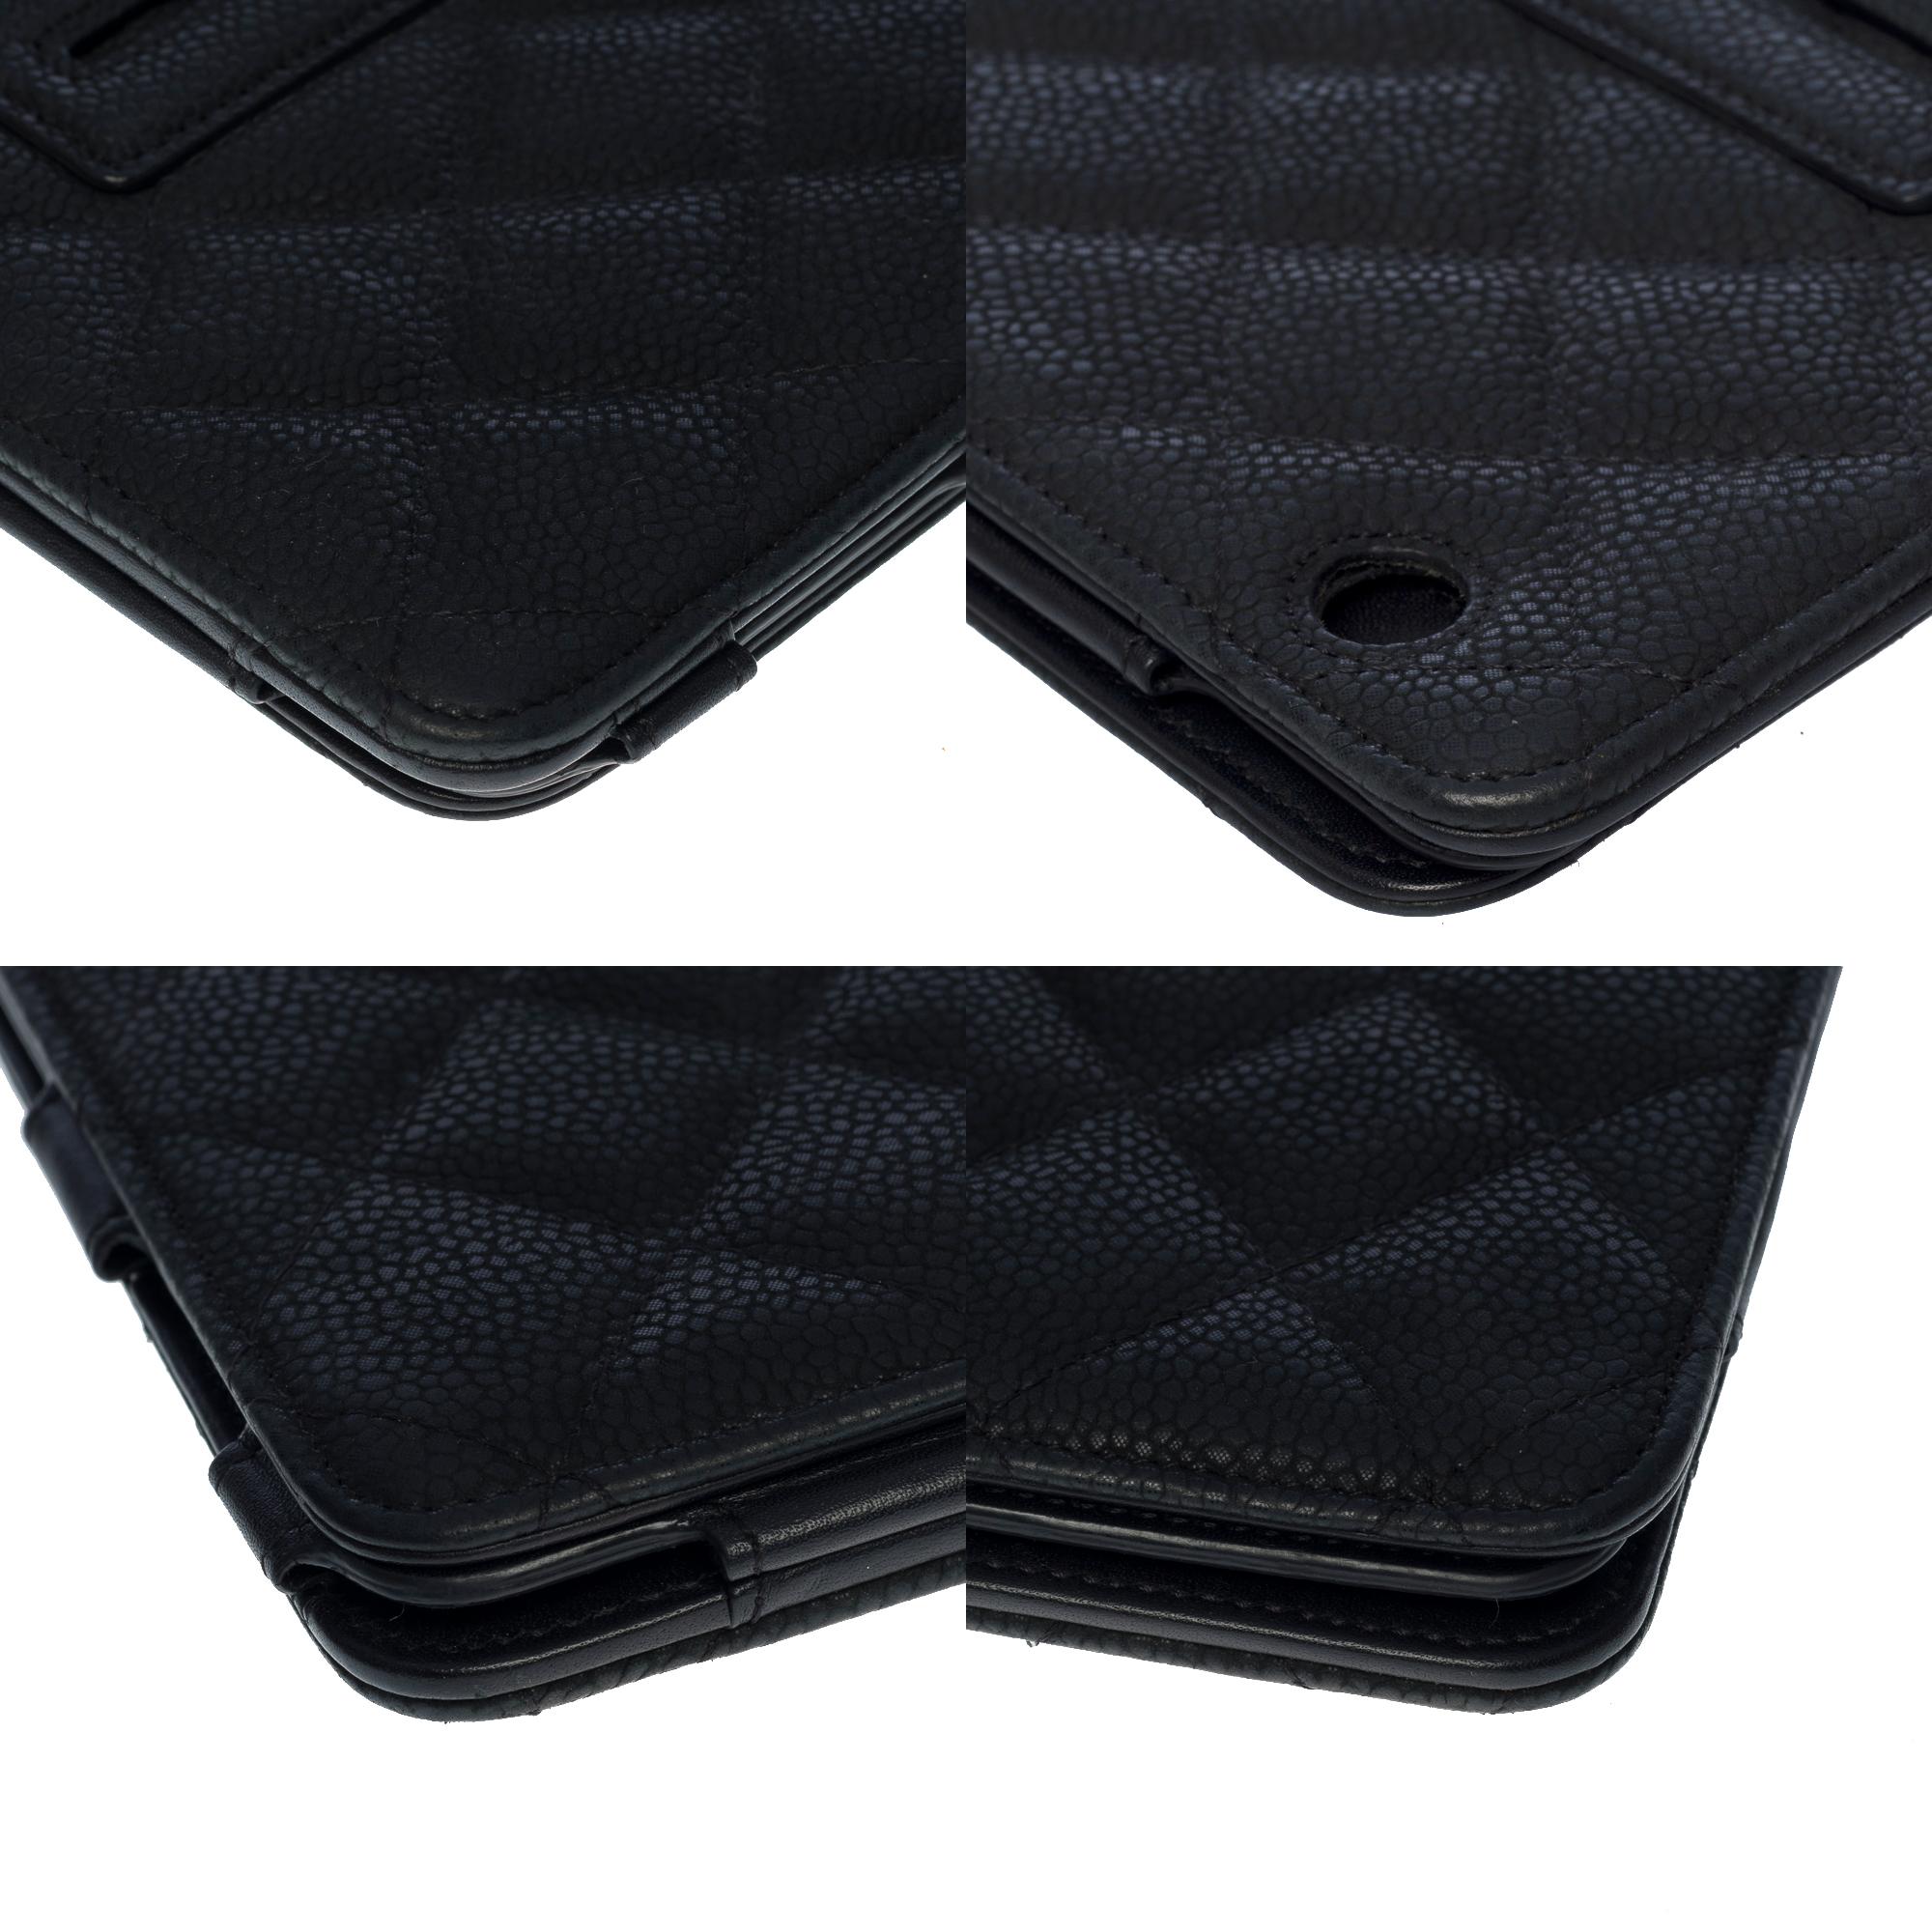 Rare Chanel Ipad/Tablet pouch in black mattified caviar leather, SHW 2